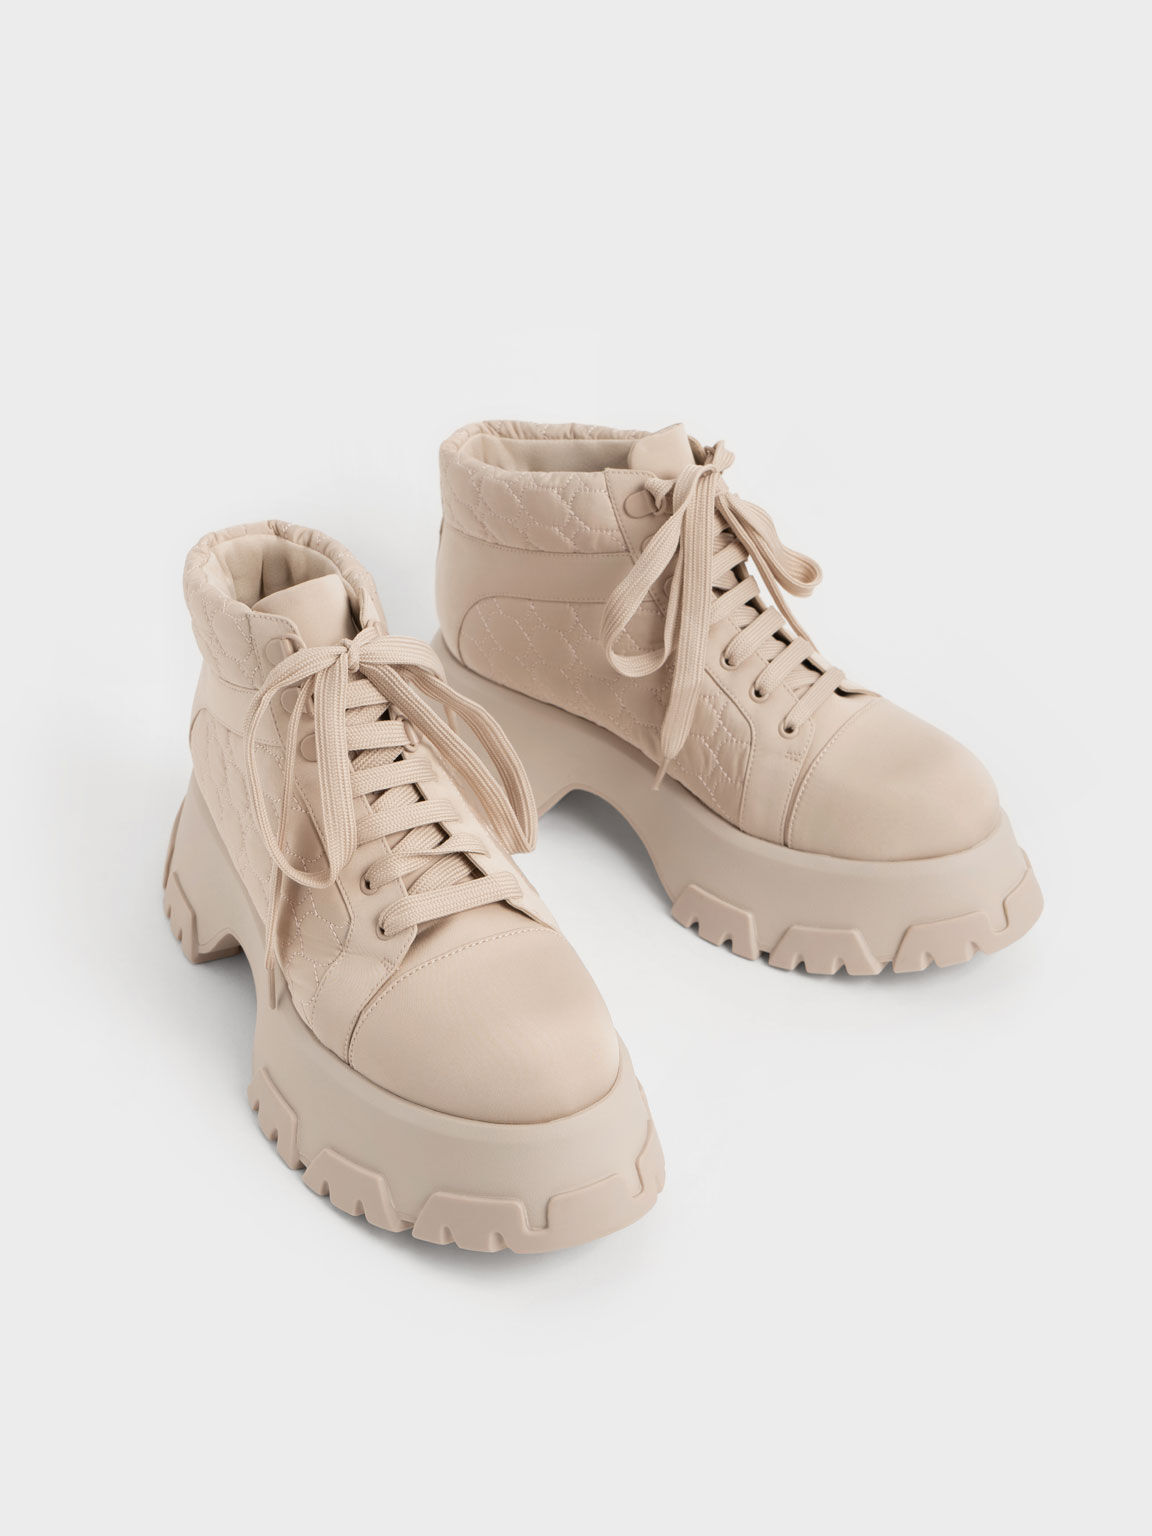 Recycled Polyester High-Top Sneakers, Nude, hi-res